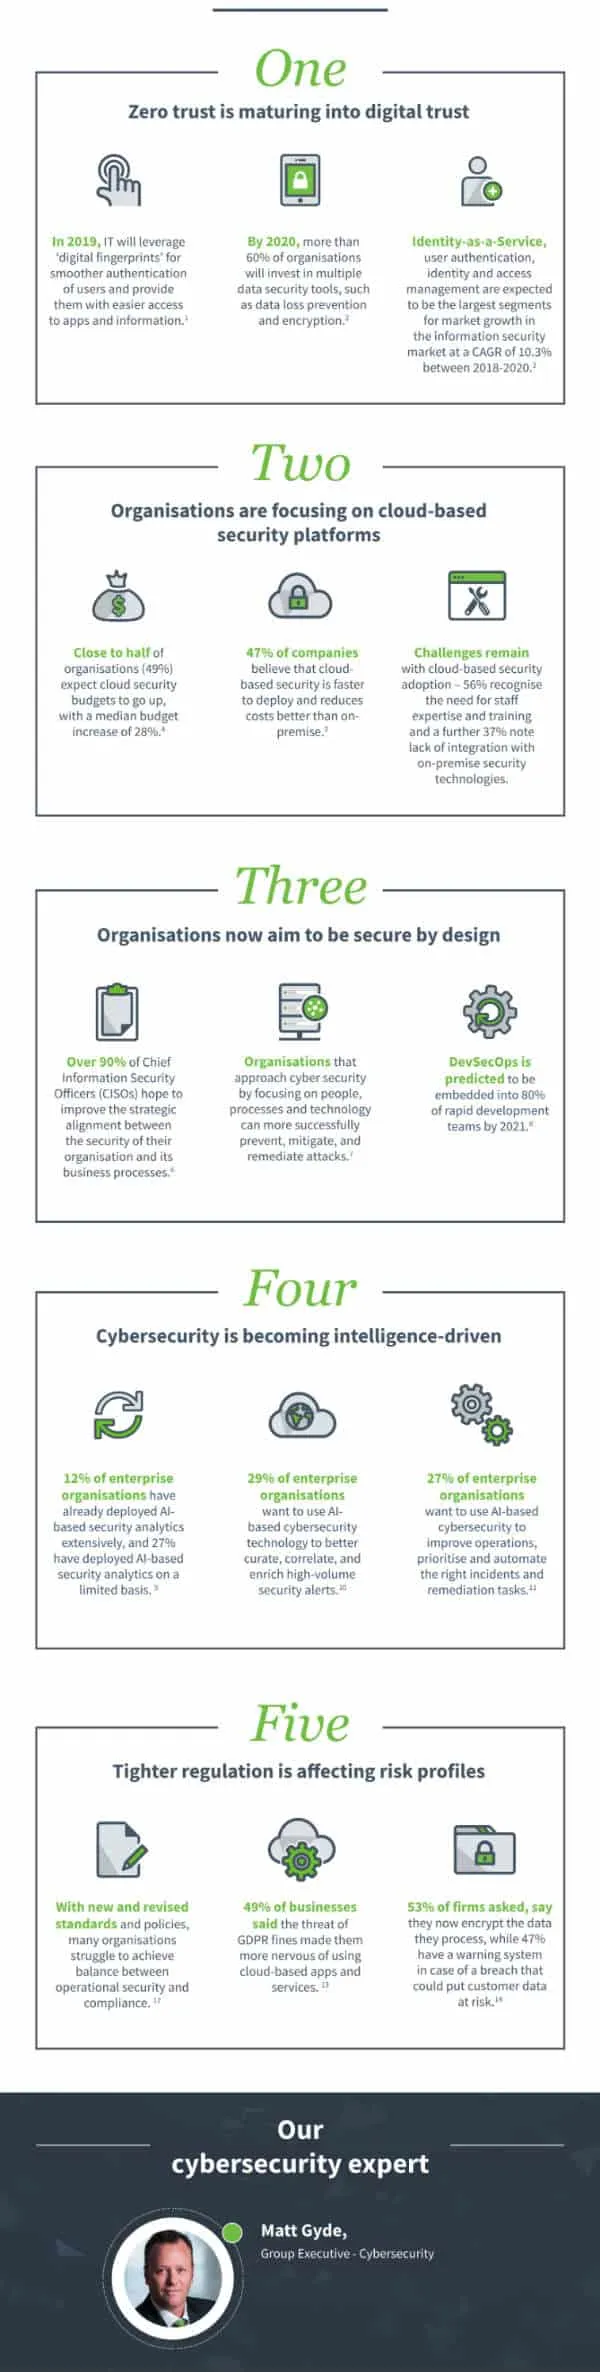 IT TRENDS 2019 - Cybersecurity infographic